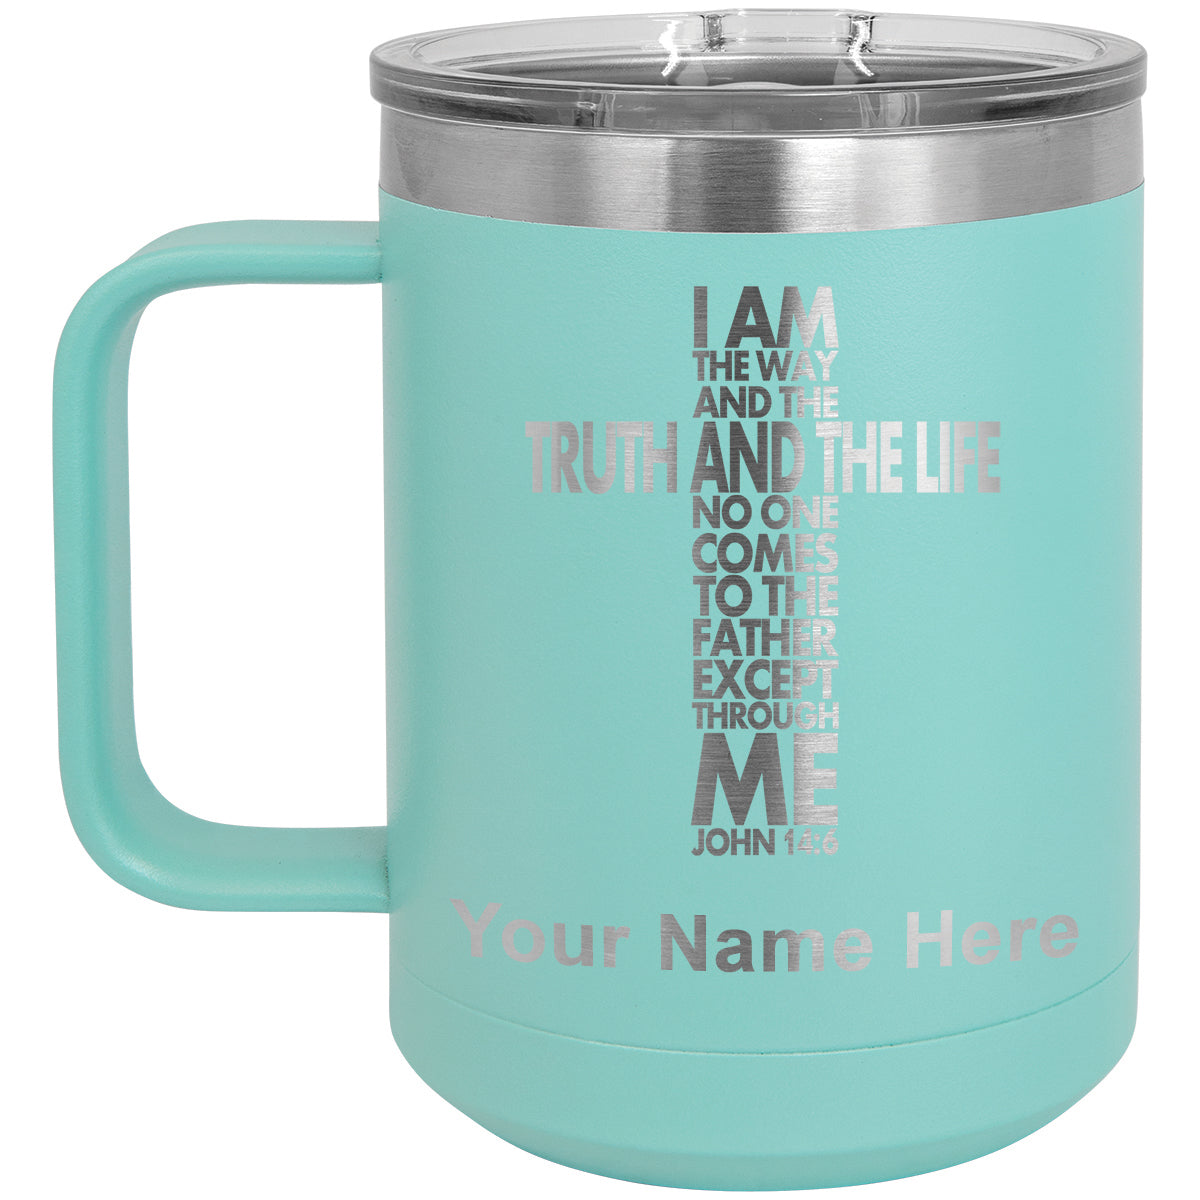 15oz Vacuum Insulated Coffee Mug, Bible Verse John 14-6, Personalized Engraving Included